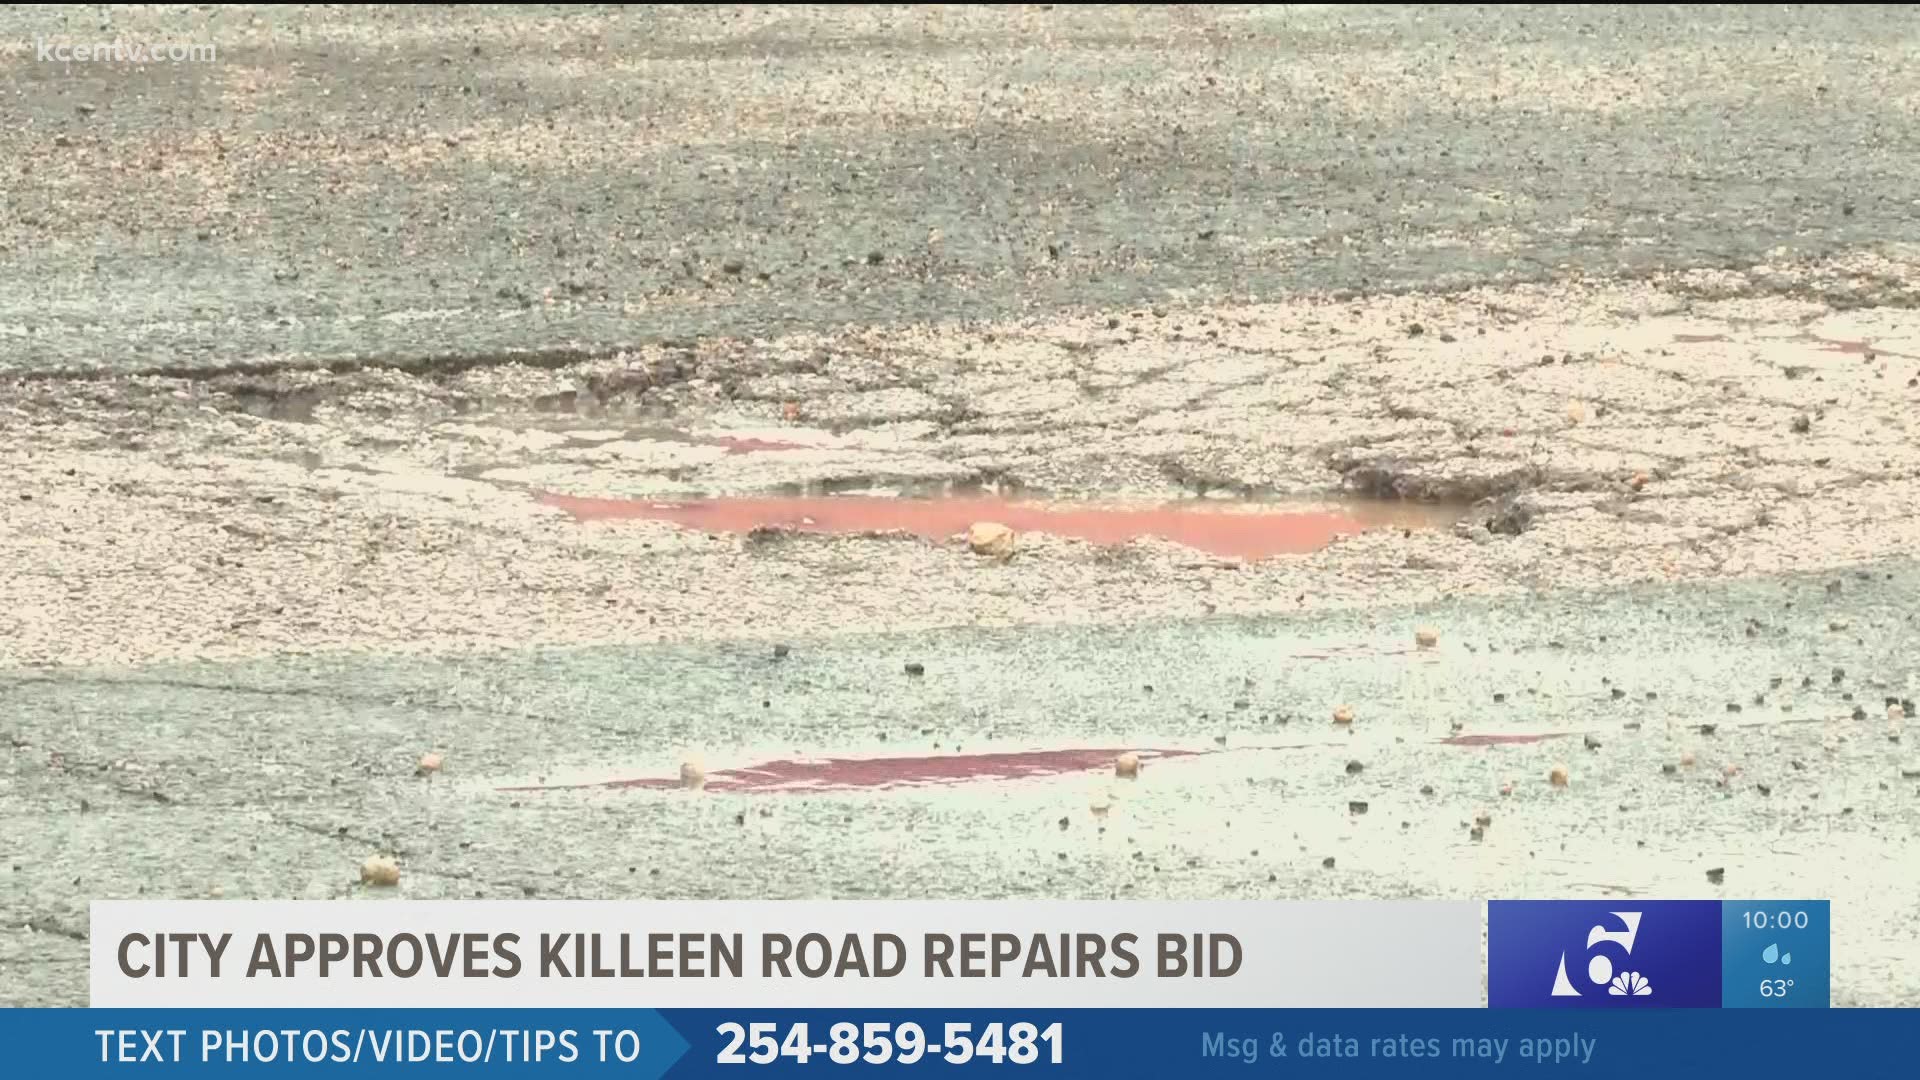 Drivers will start to see repairs being made to major roads and highways as early as next week.